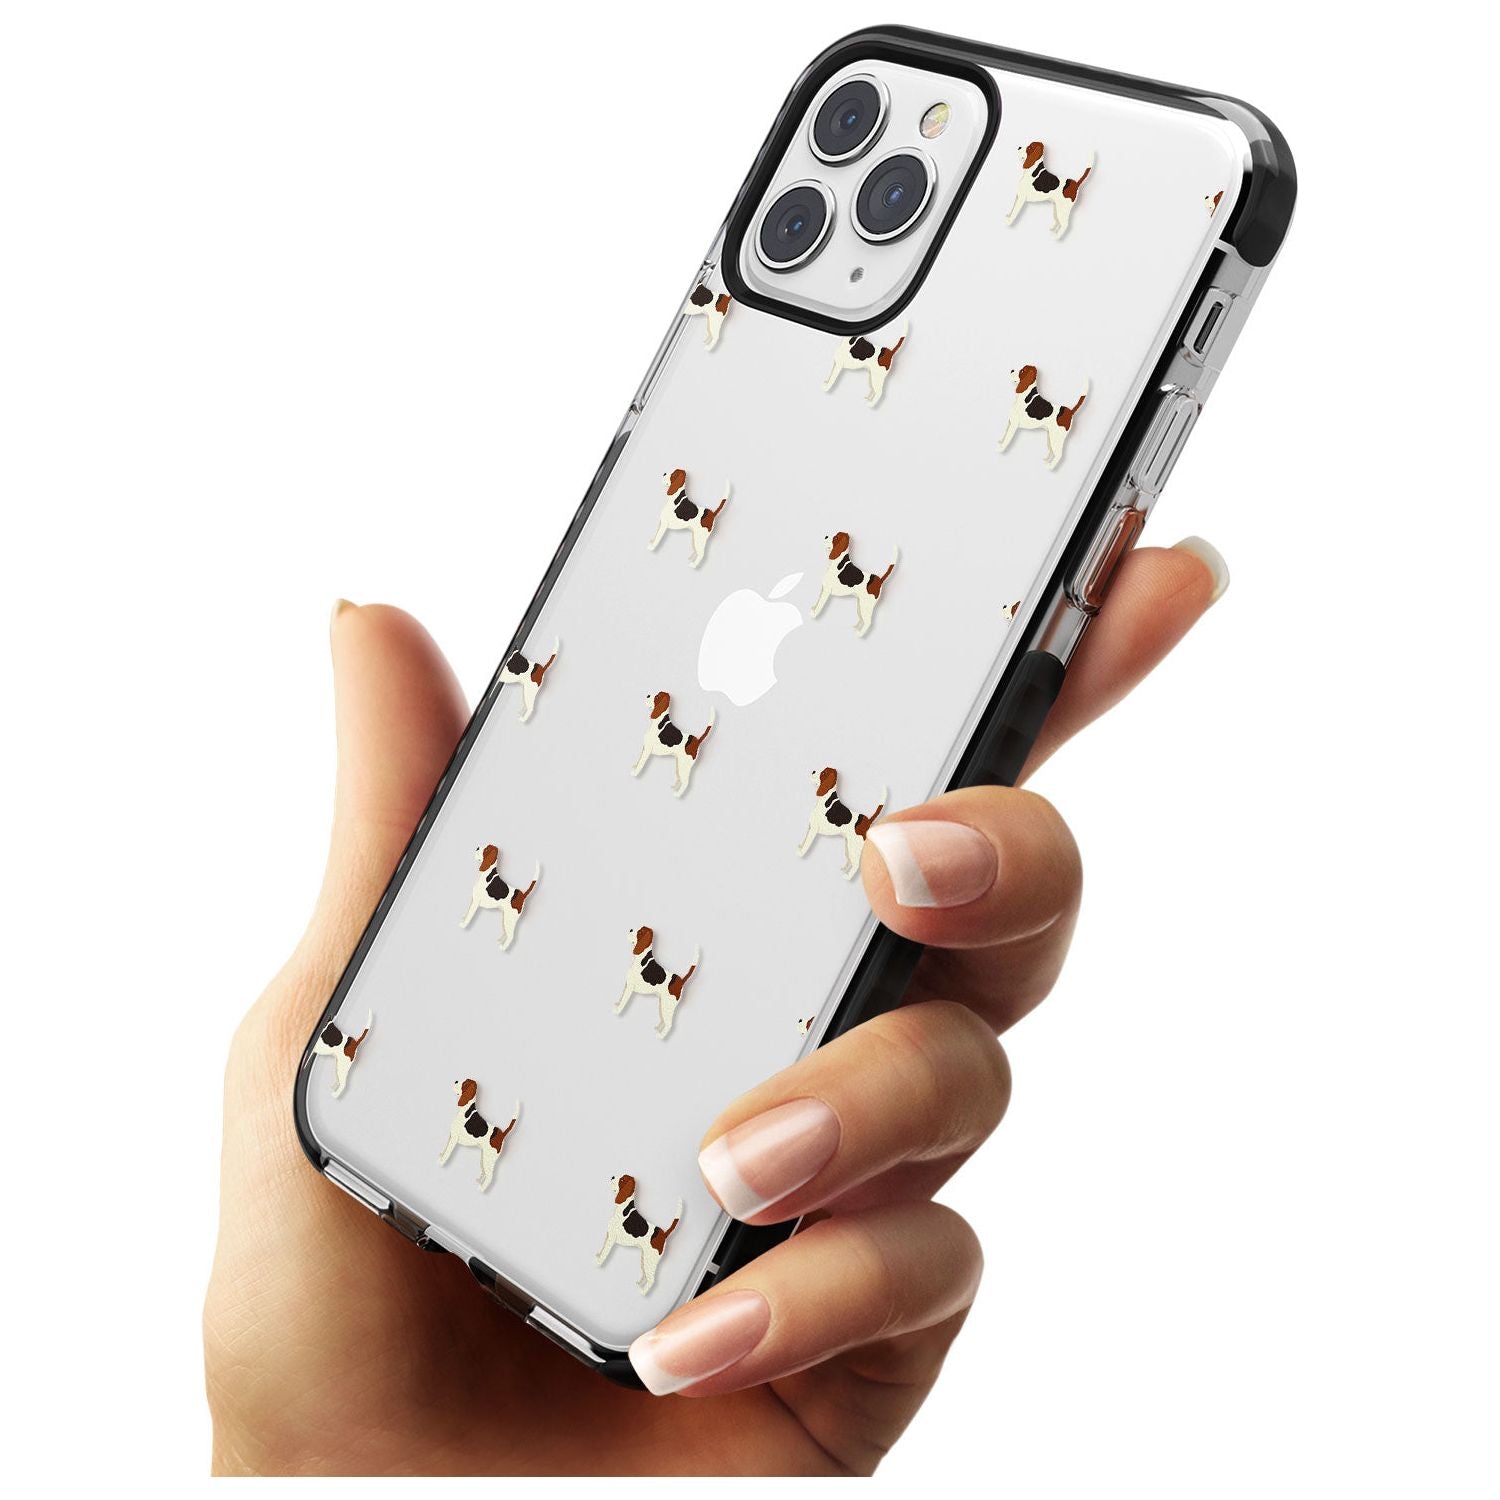 Beagle Dog Pattern Clear Black Impact Phone Case for iPhone 11 Pro Max